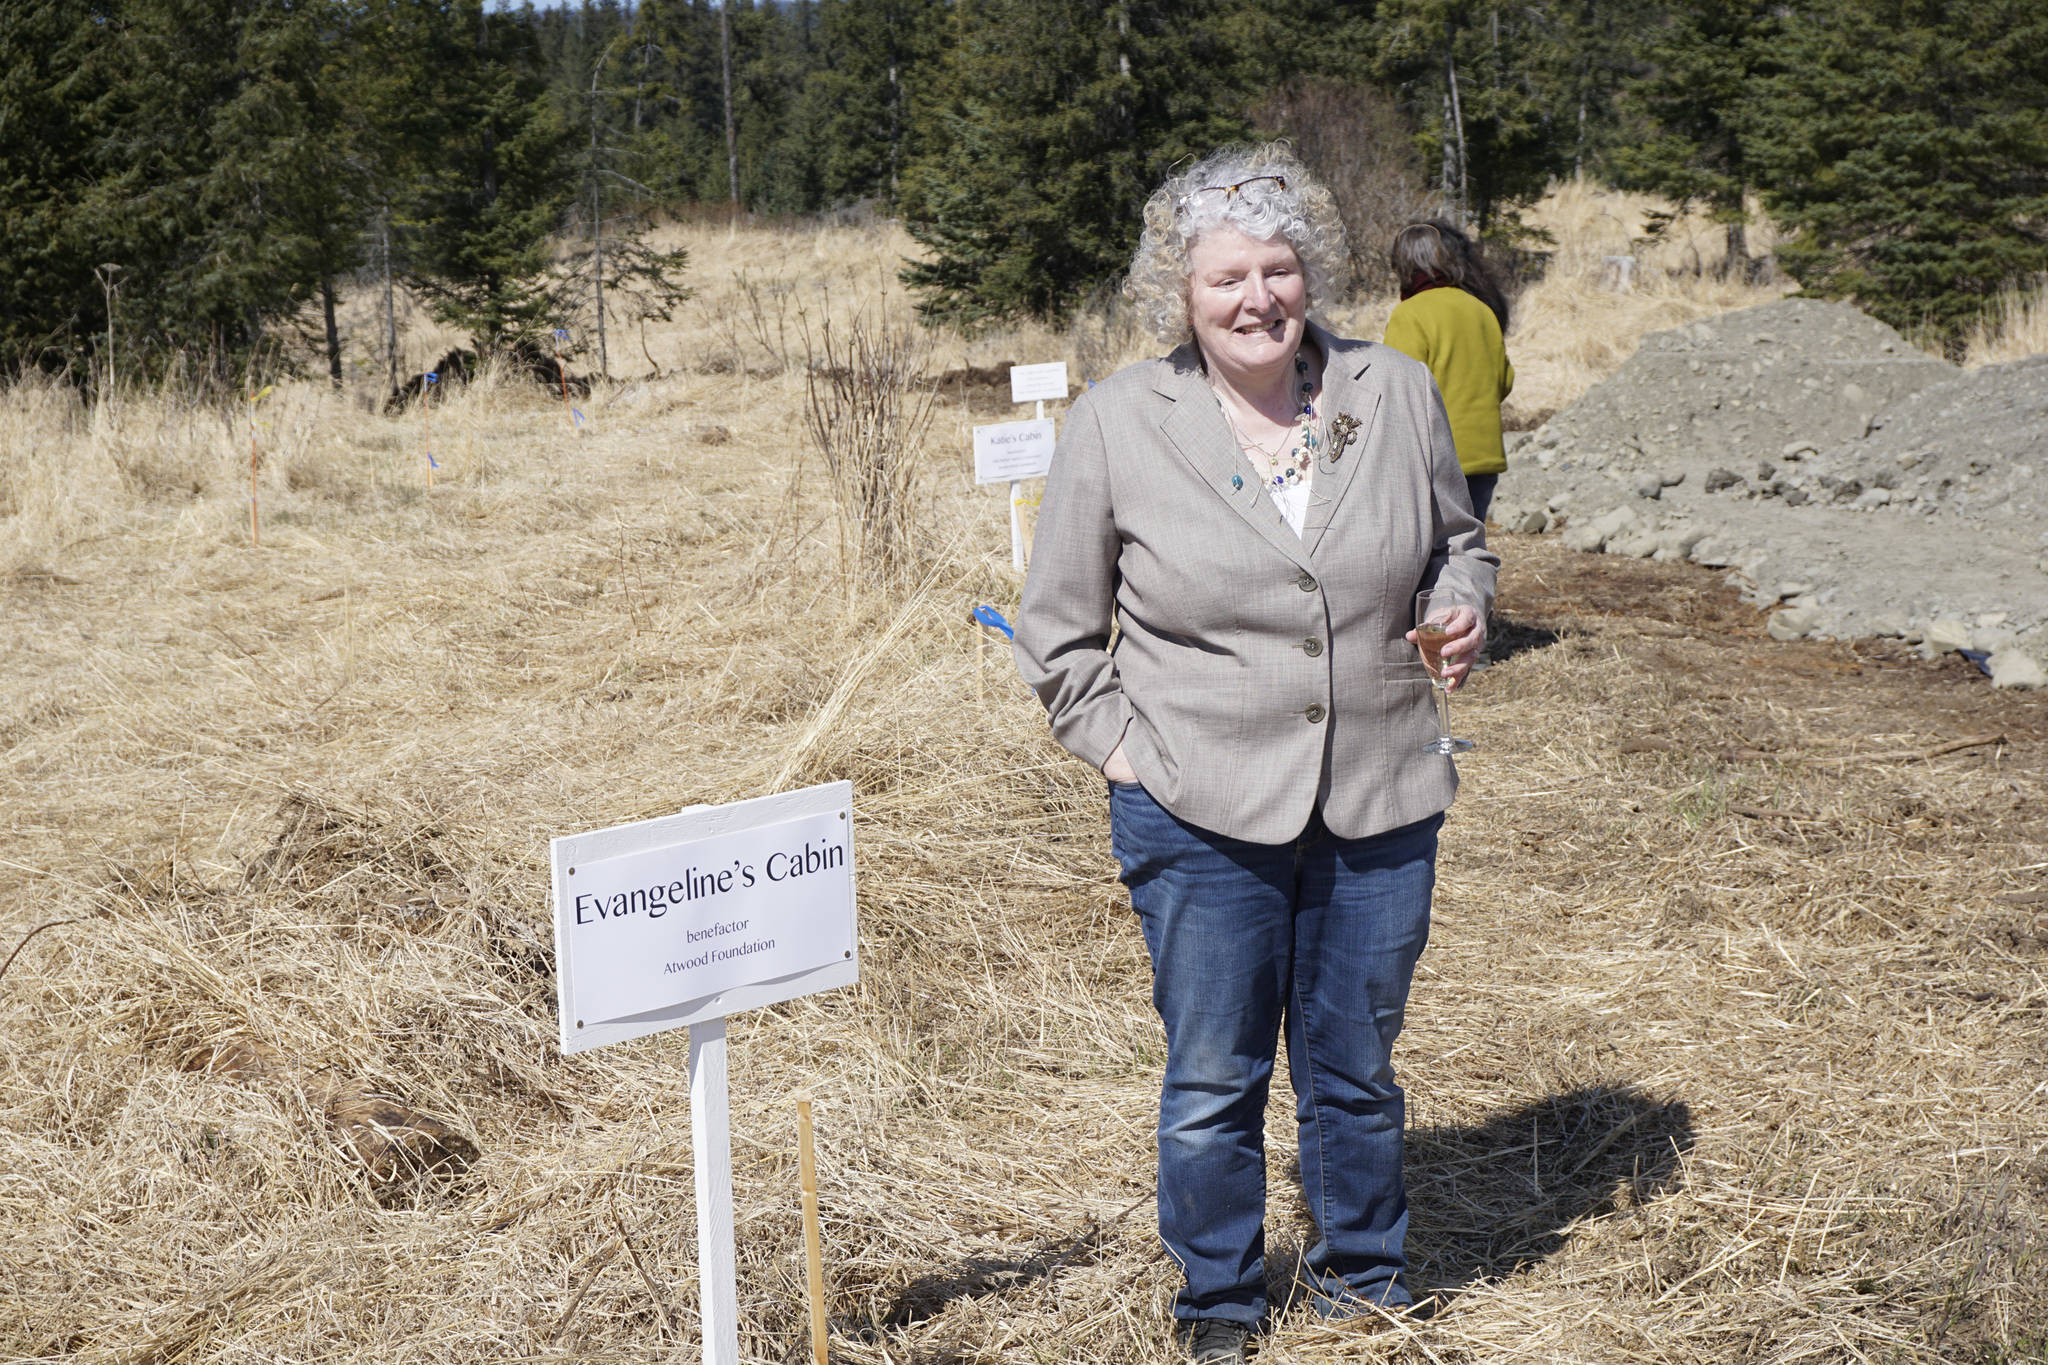 Homer writer and Storyknife Writers Retreat founder Dana Stabenow stands near the site of a cabin at groundbreaking ceremonies last Saturday, May 4, 2019, at the retreat property in Homer, Alaska. Construction started this month on the main house and cabins that will in a year house visiting women writers. (Photo by Michael Armstrong/Homer News)